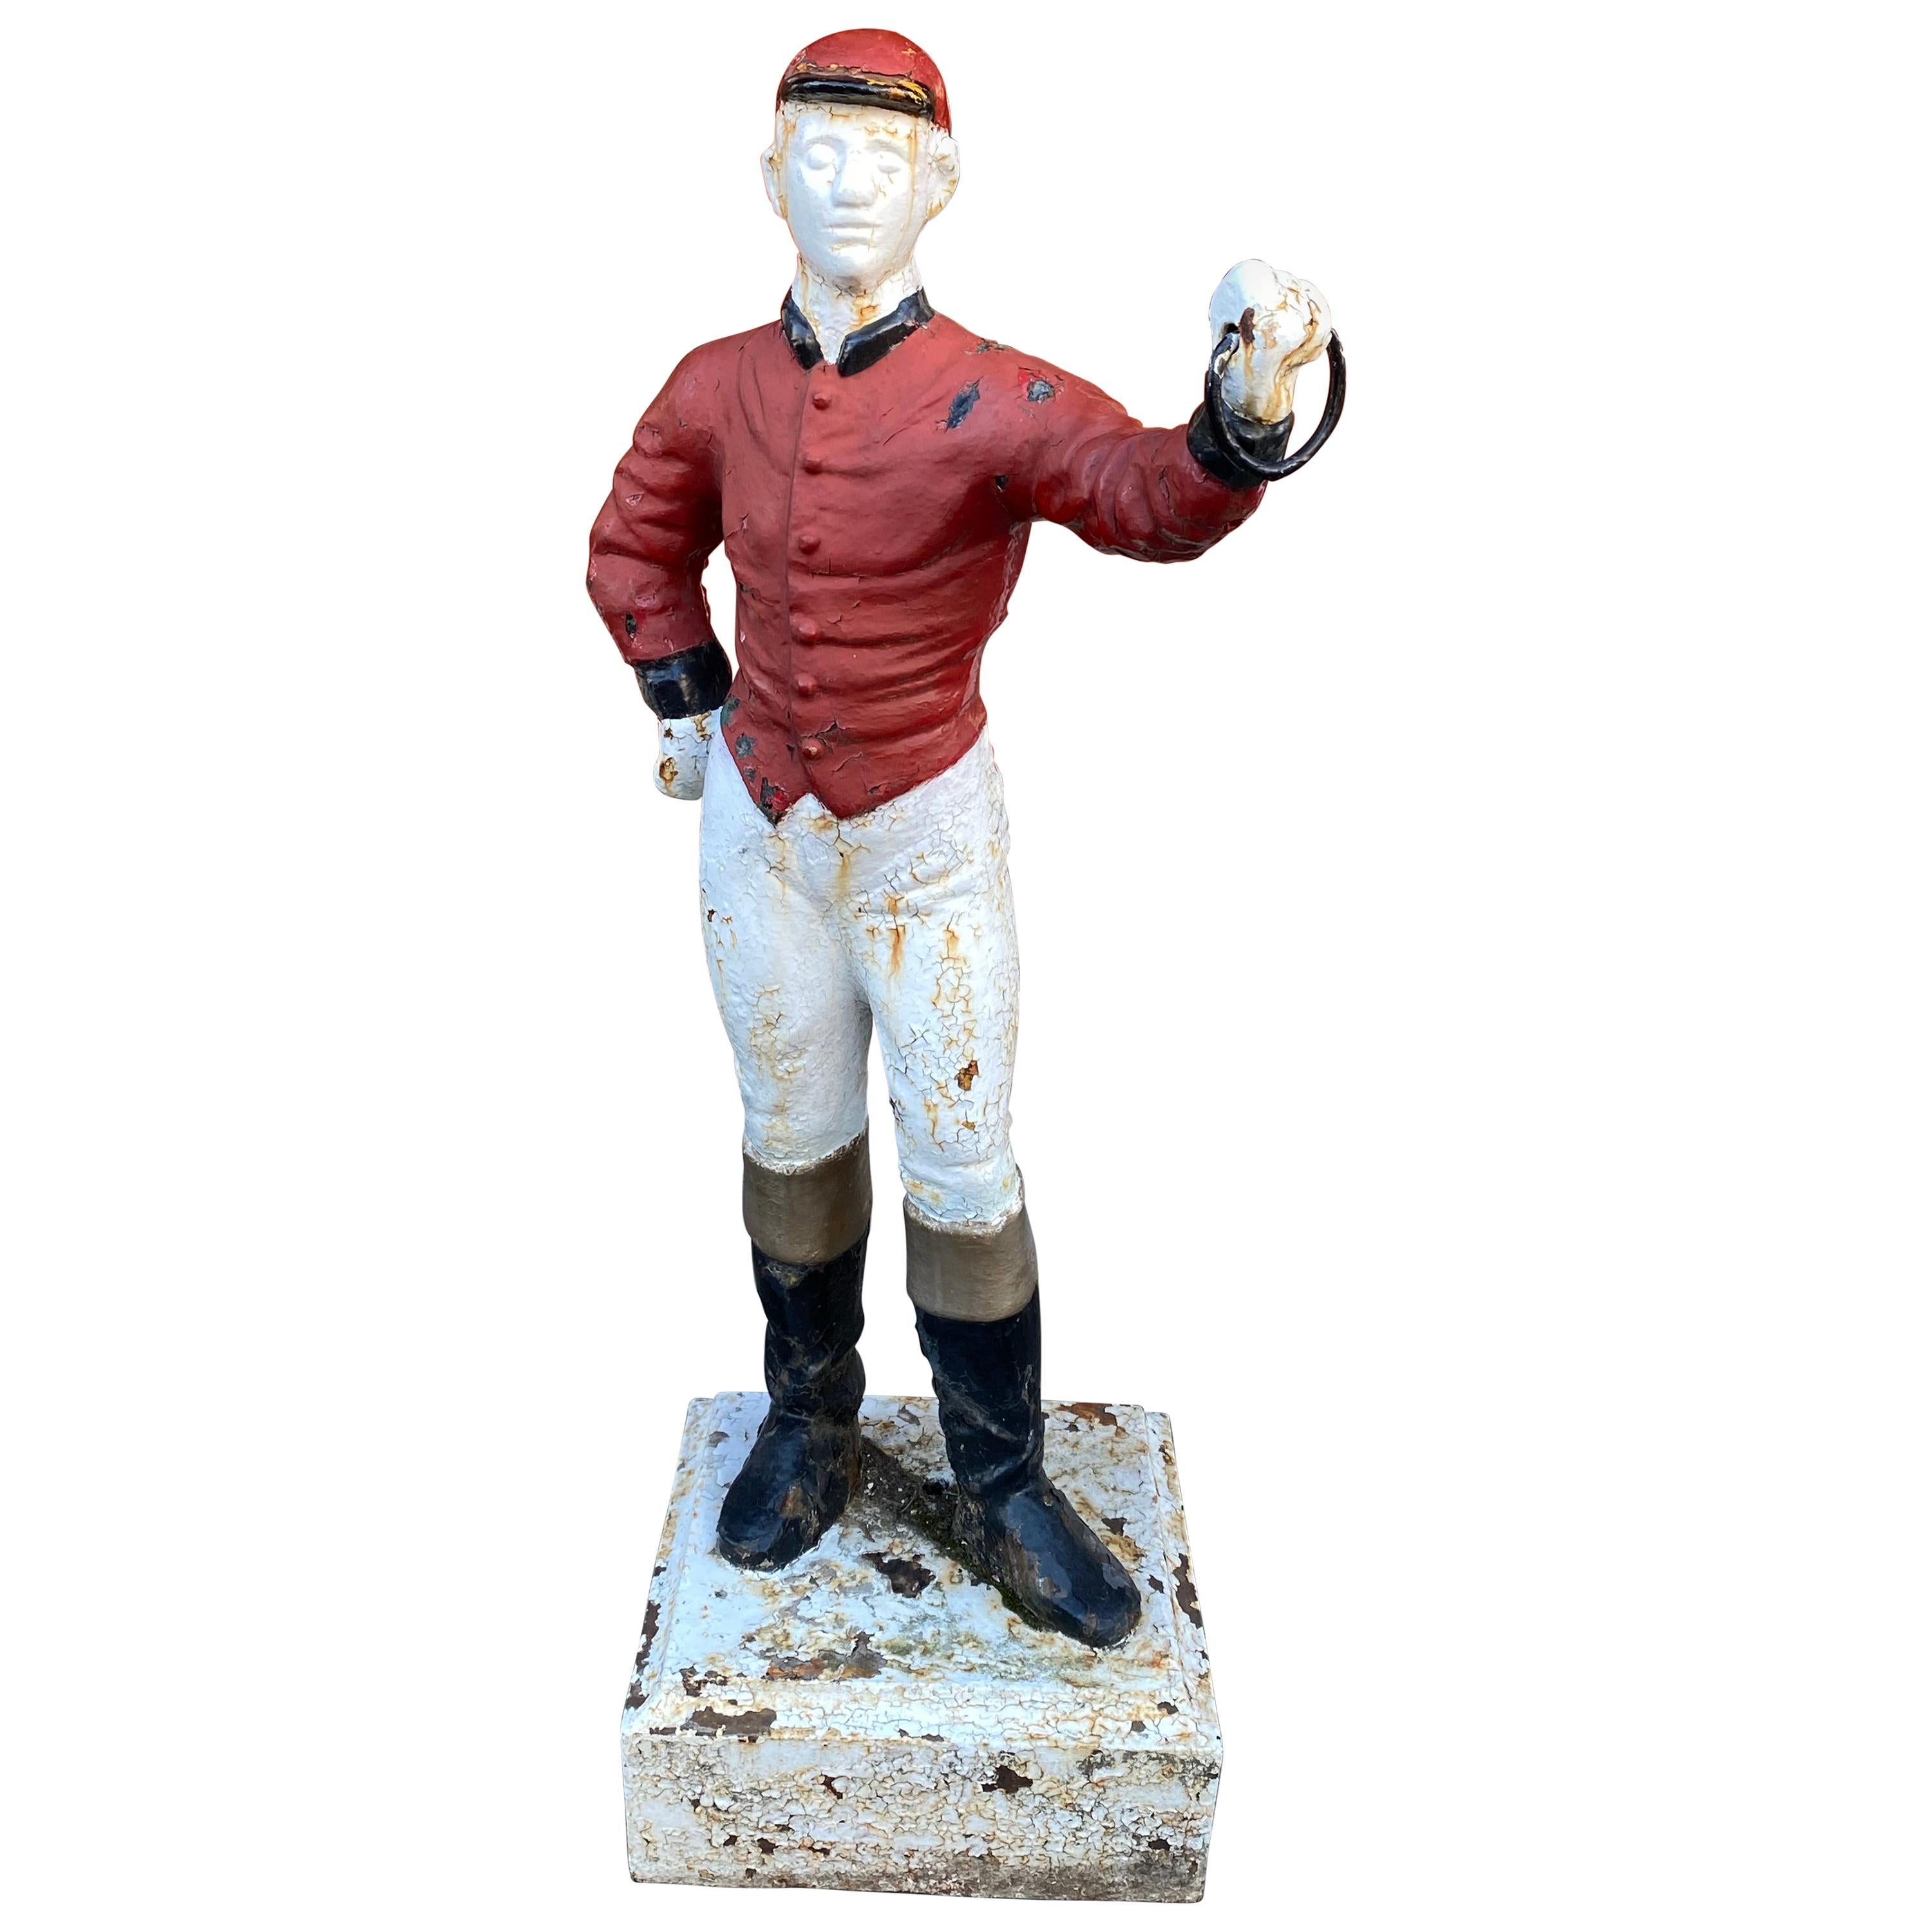 Cast Iron Lawn Jockey from the 1920s, in Red and White Paint